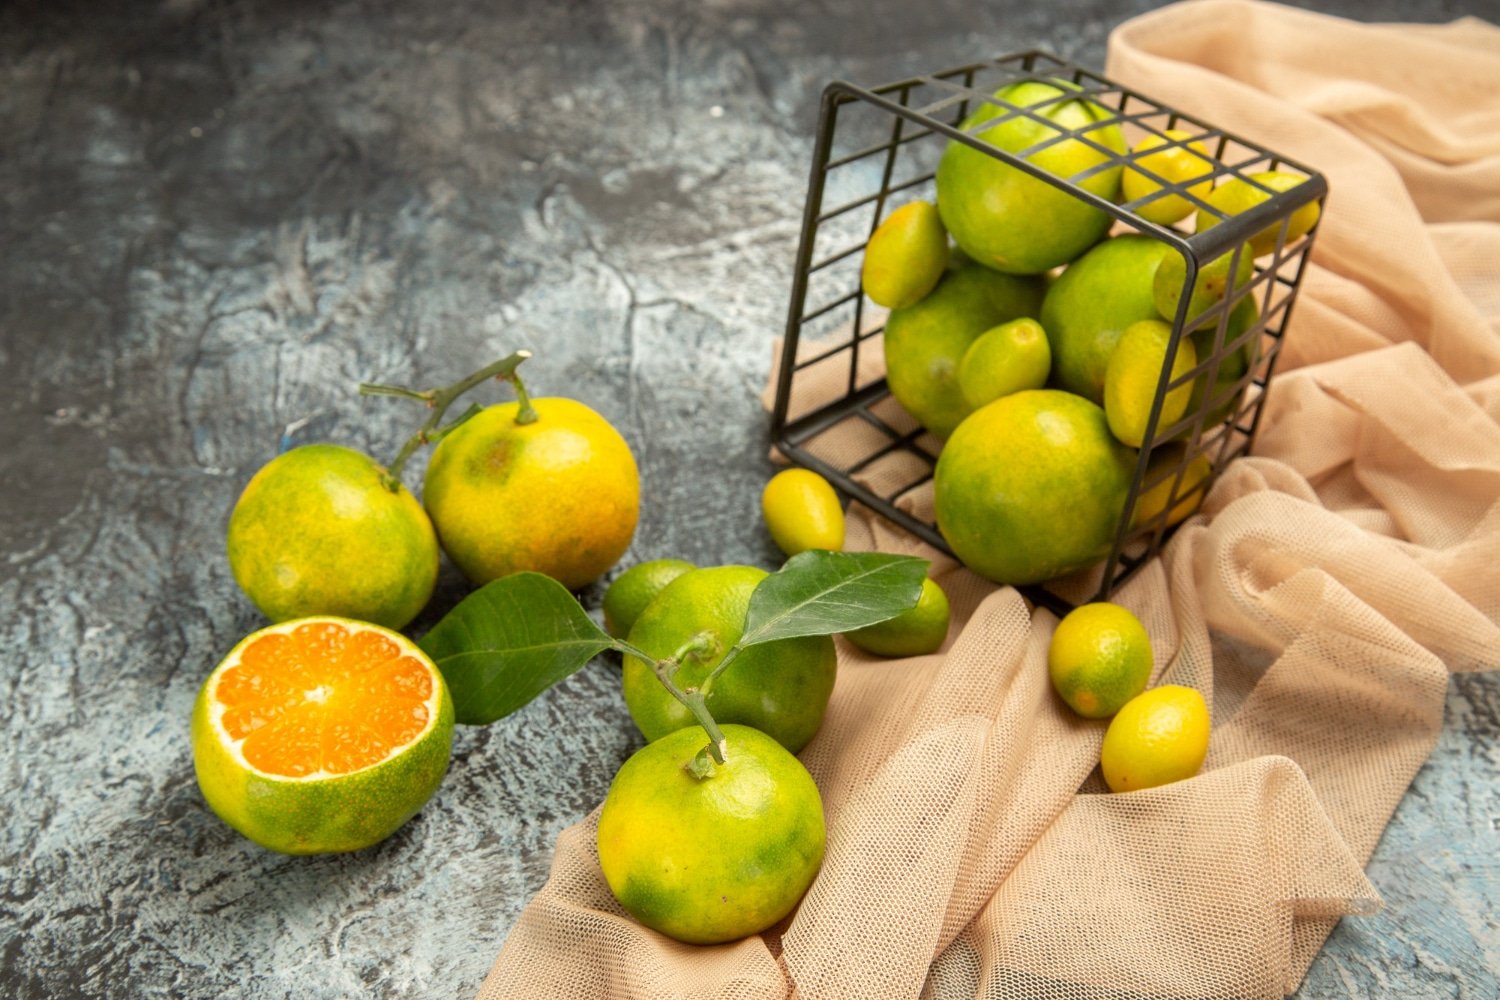 Hale Groves Fresh Citrus Delivered to Your Door